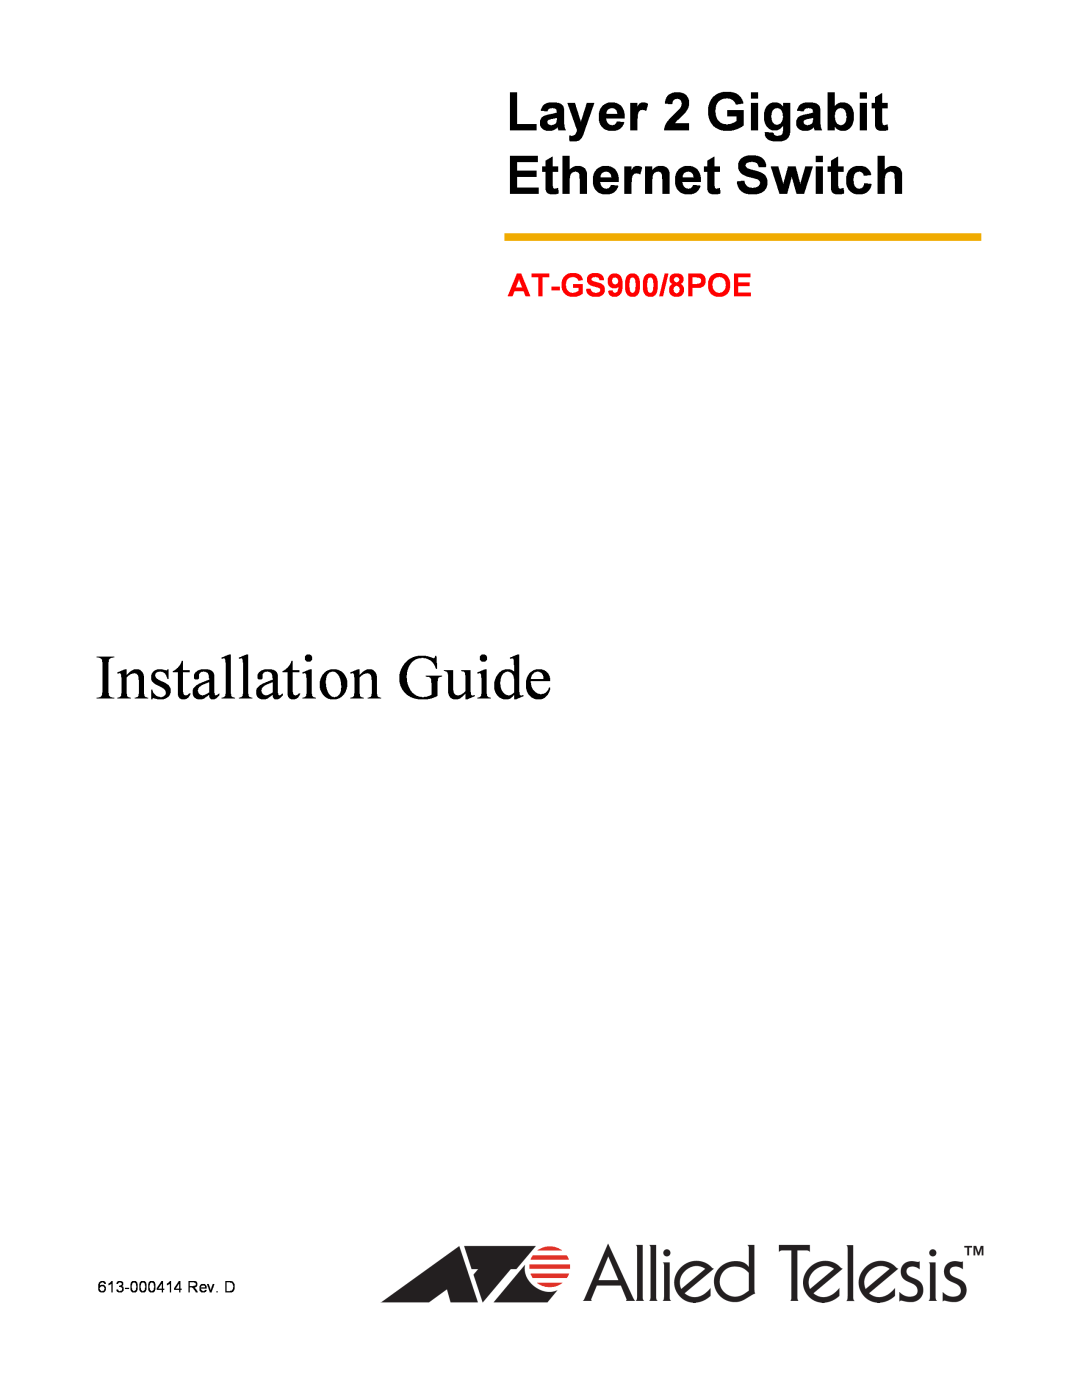 Allied Telesis manual Installation Guide, Layer 2 Gigabit Ethernet Switch, AT-GS900/8POE 